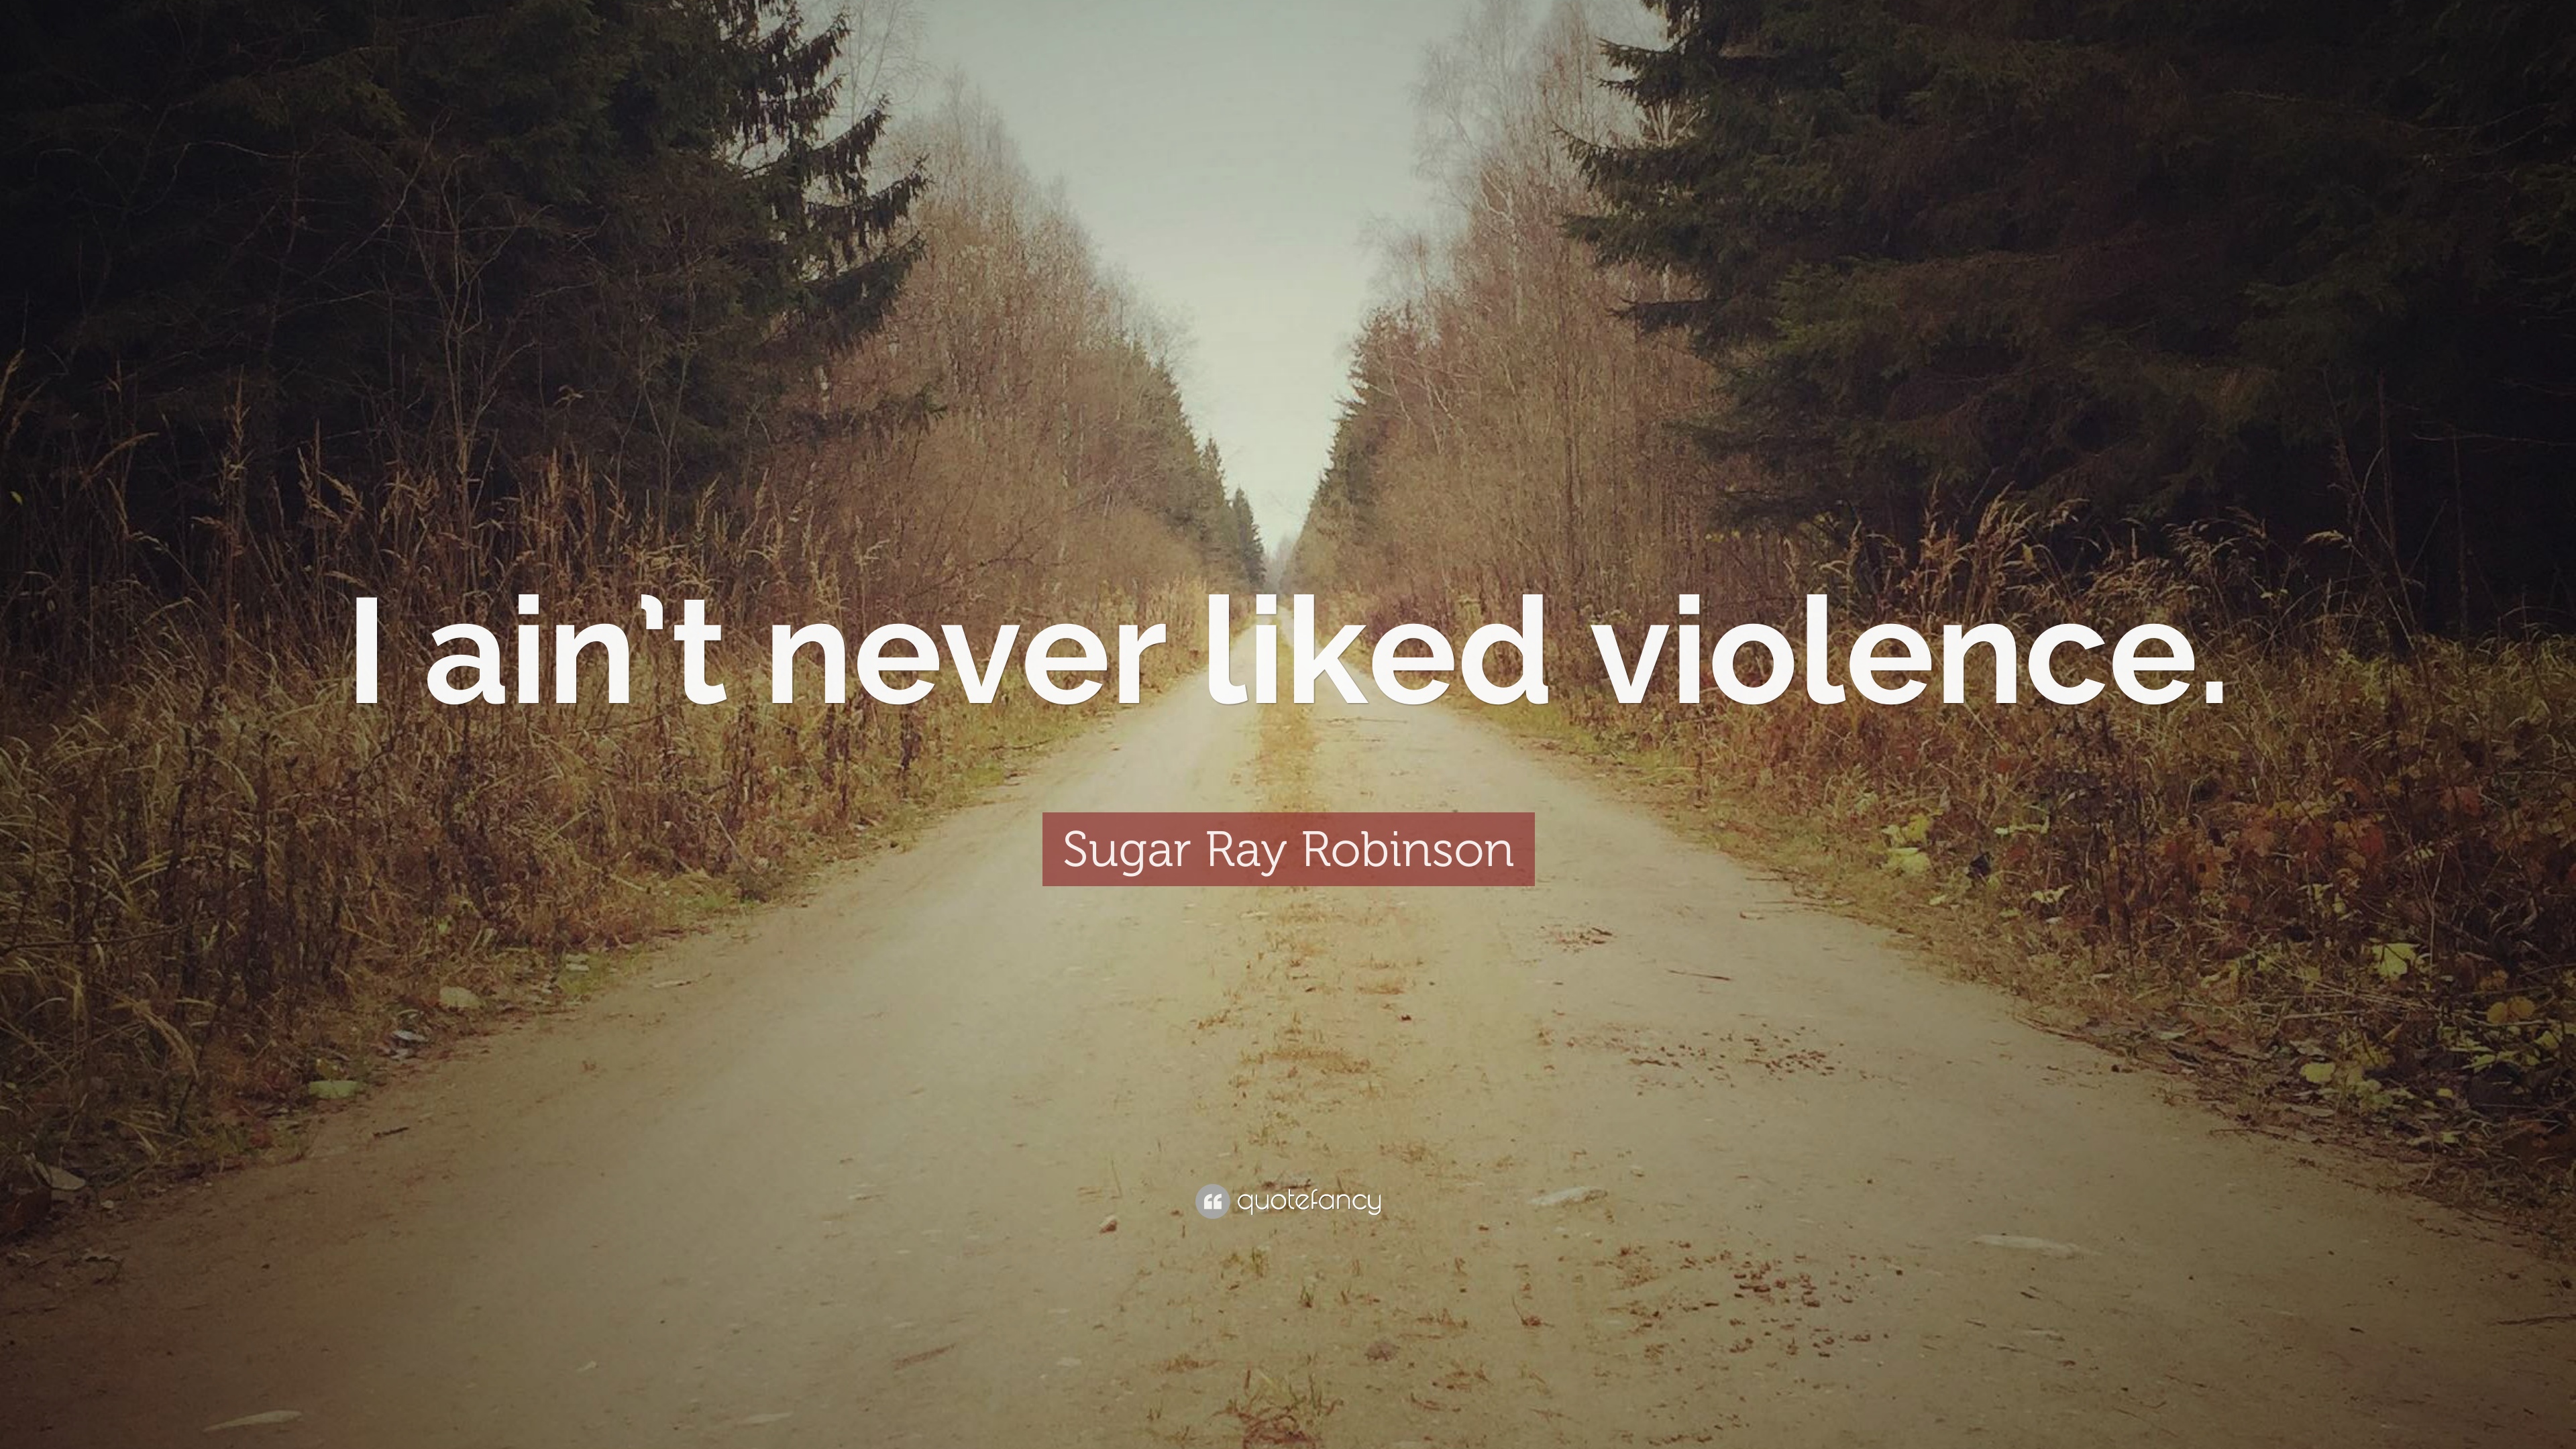 Sugar Ray Robinson Quote: “I ain't never liked violence.” 7